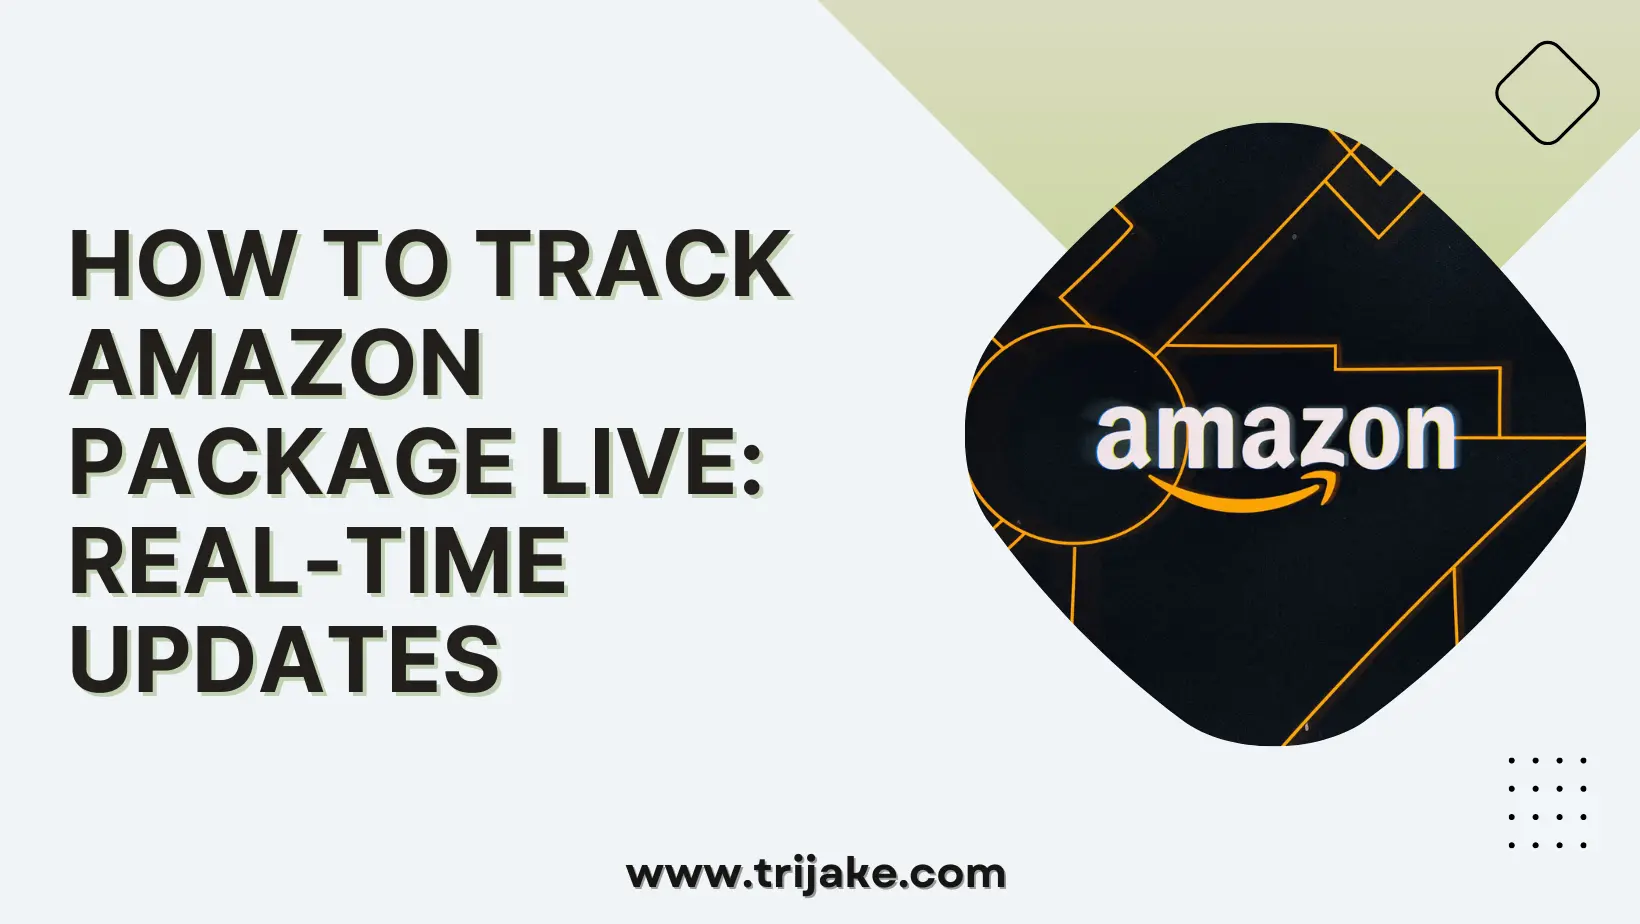 How to Track Amazon Package Live